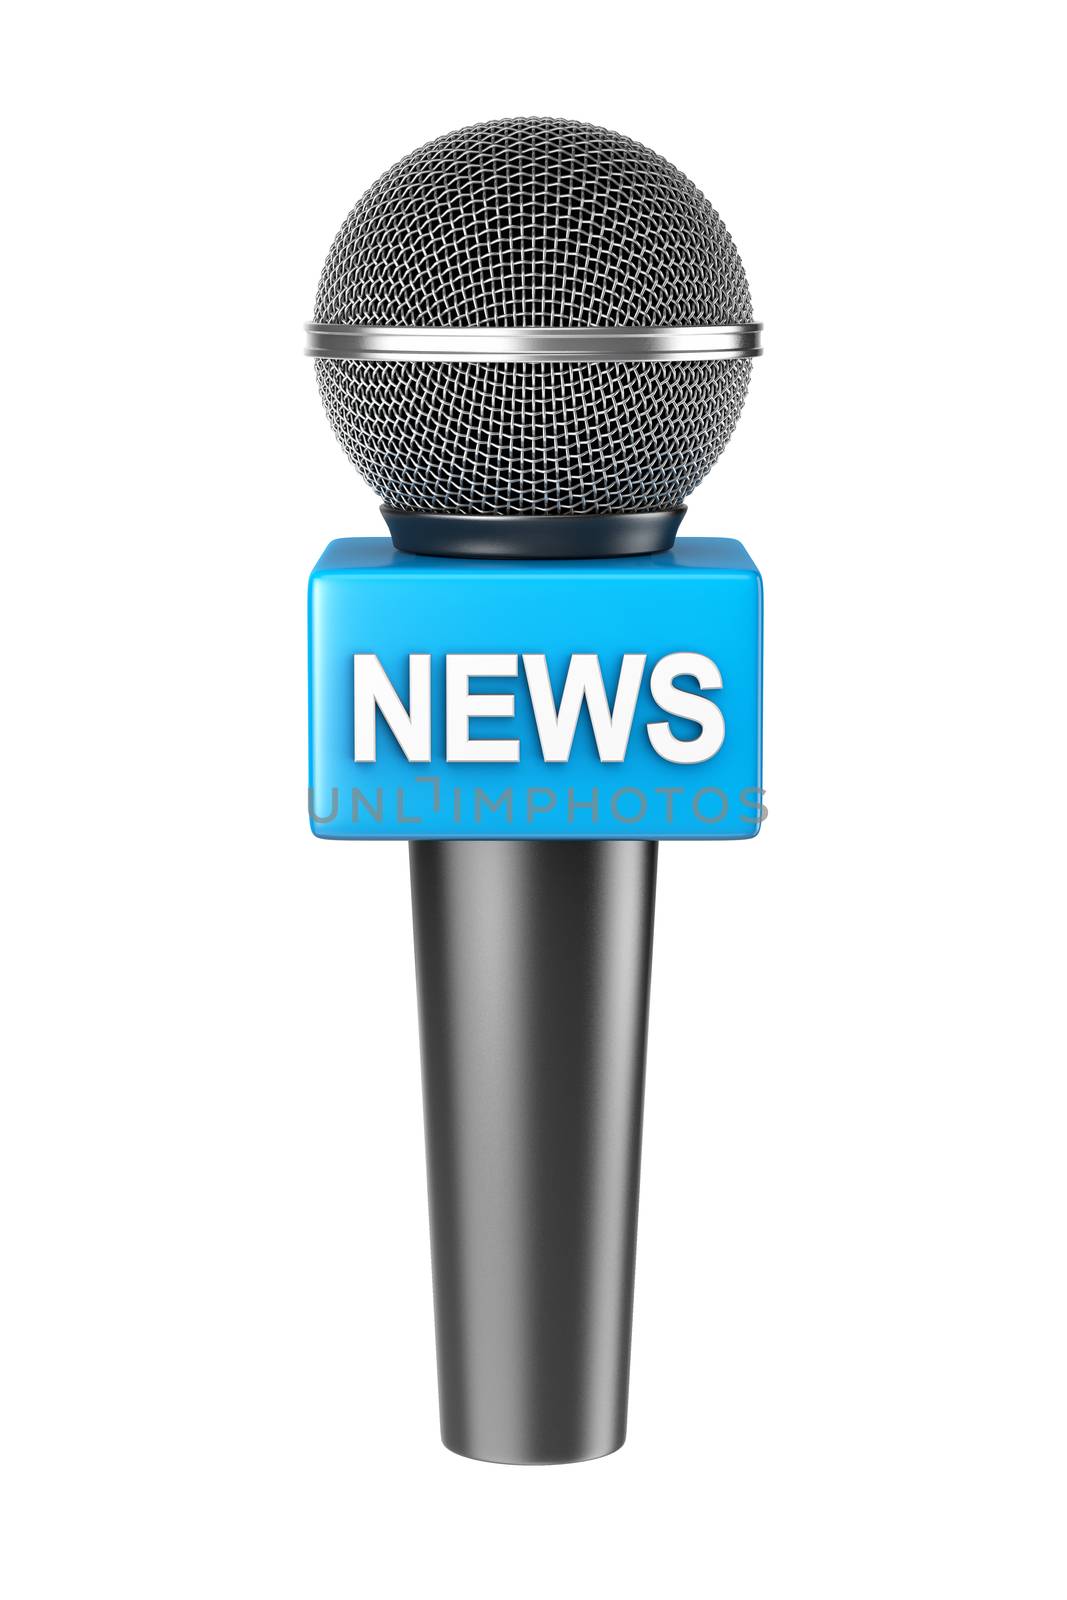 Metallic Blue Press News Microphone Isolated on White Background 3D Illustration